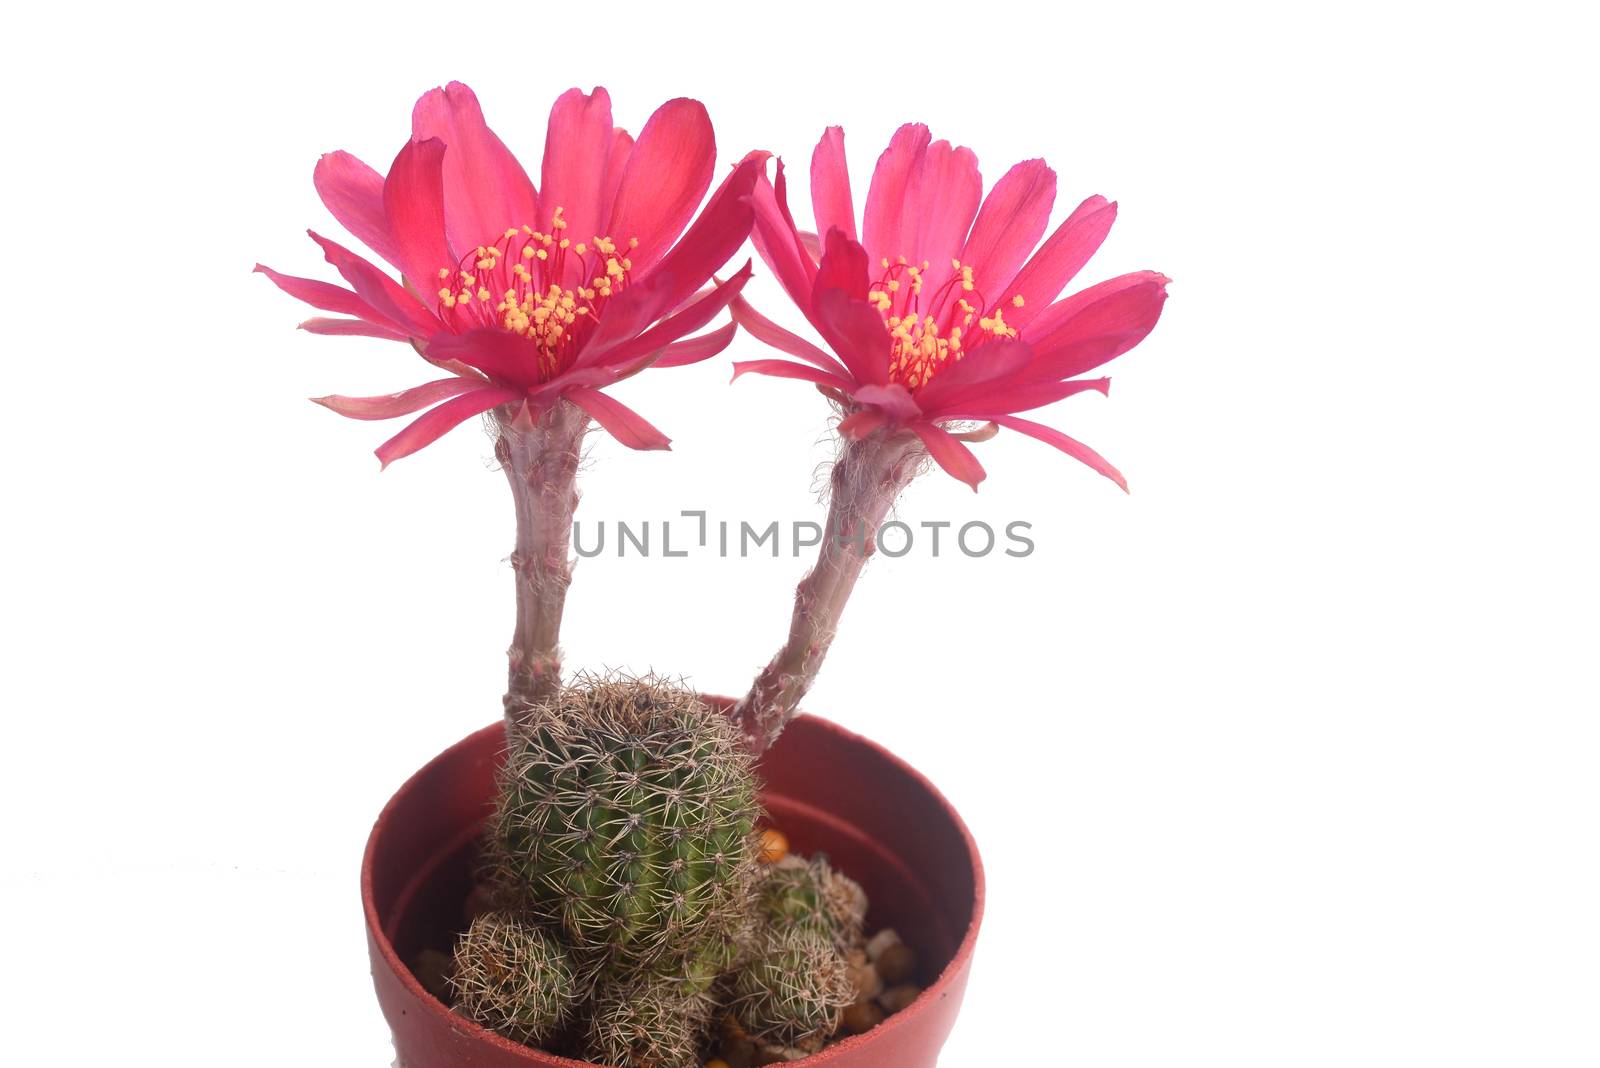 Blooming red flower of Lobivia cactus on  white background with copy space for text